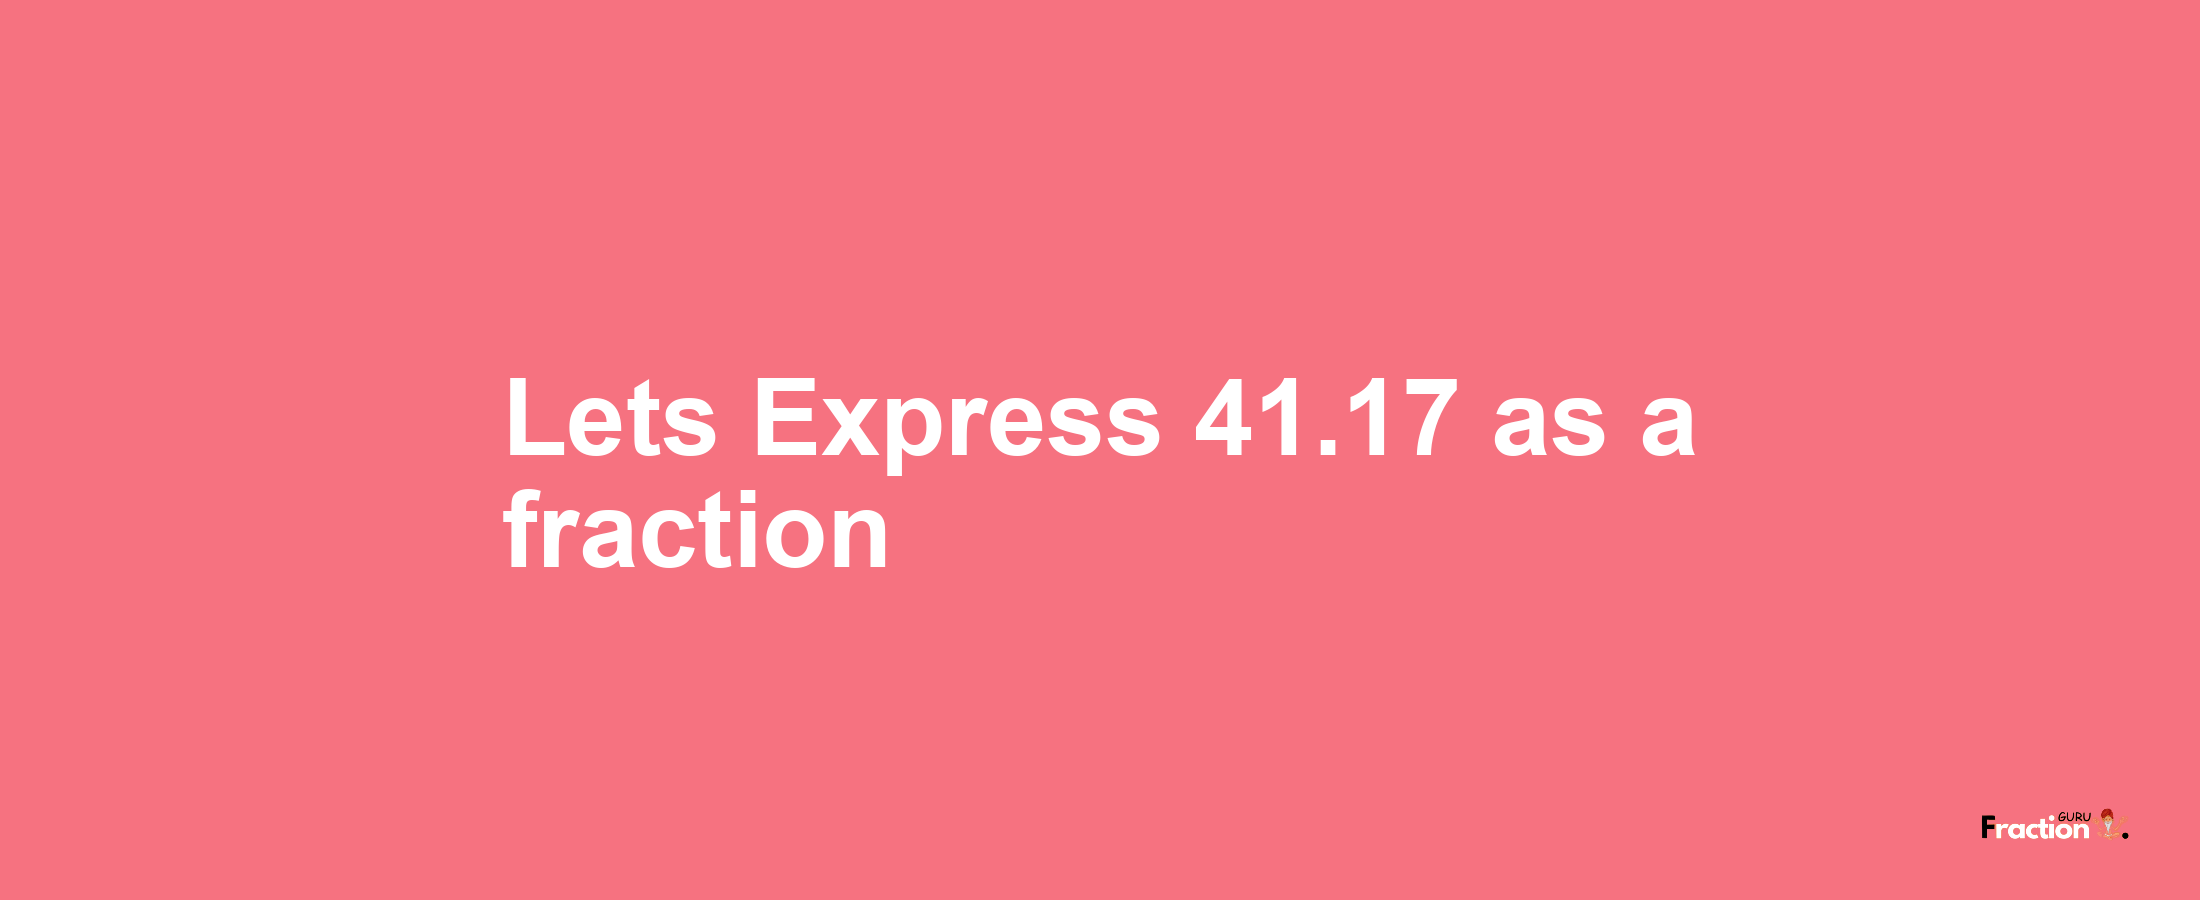 Lets Express 41.17 as afraction